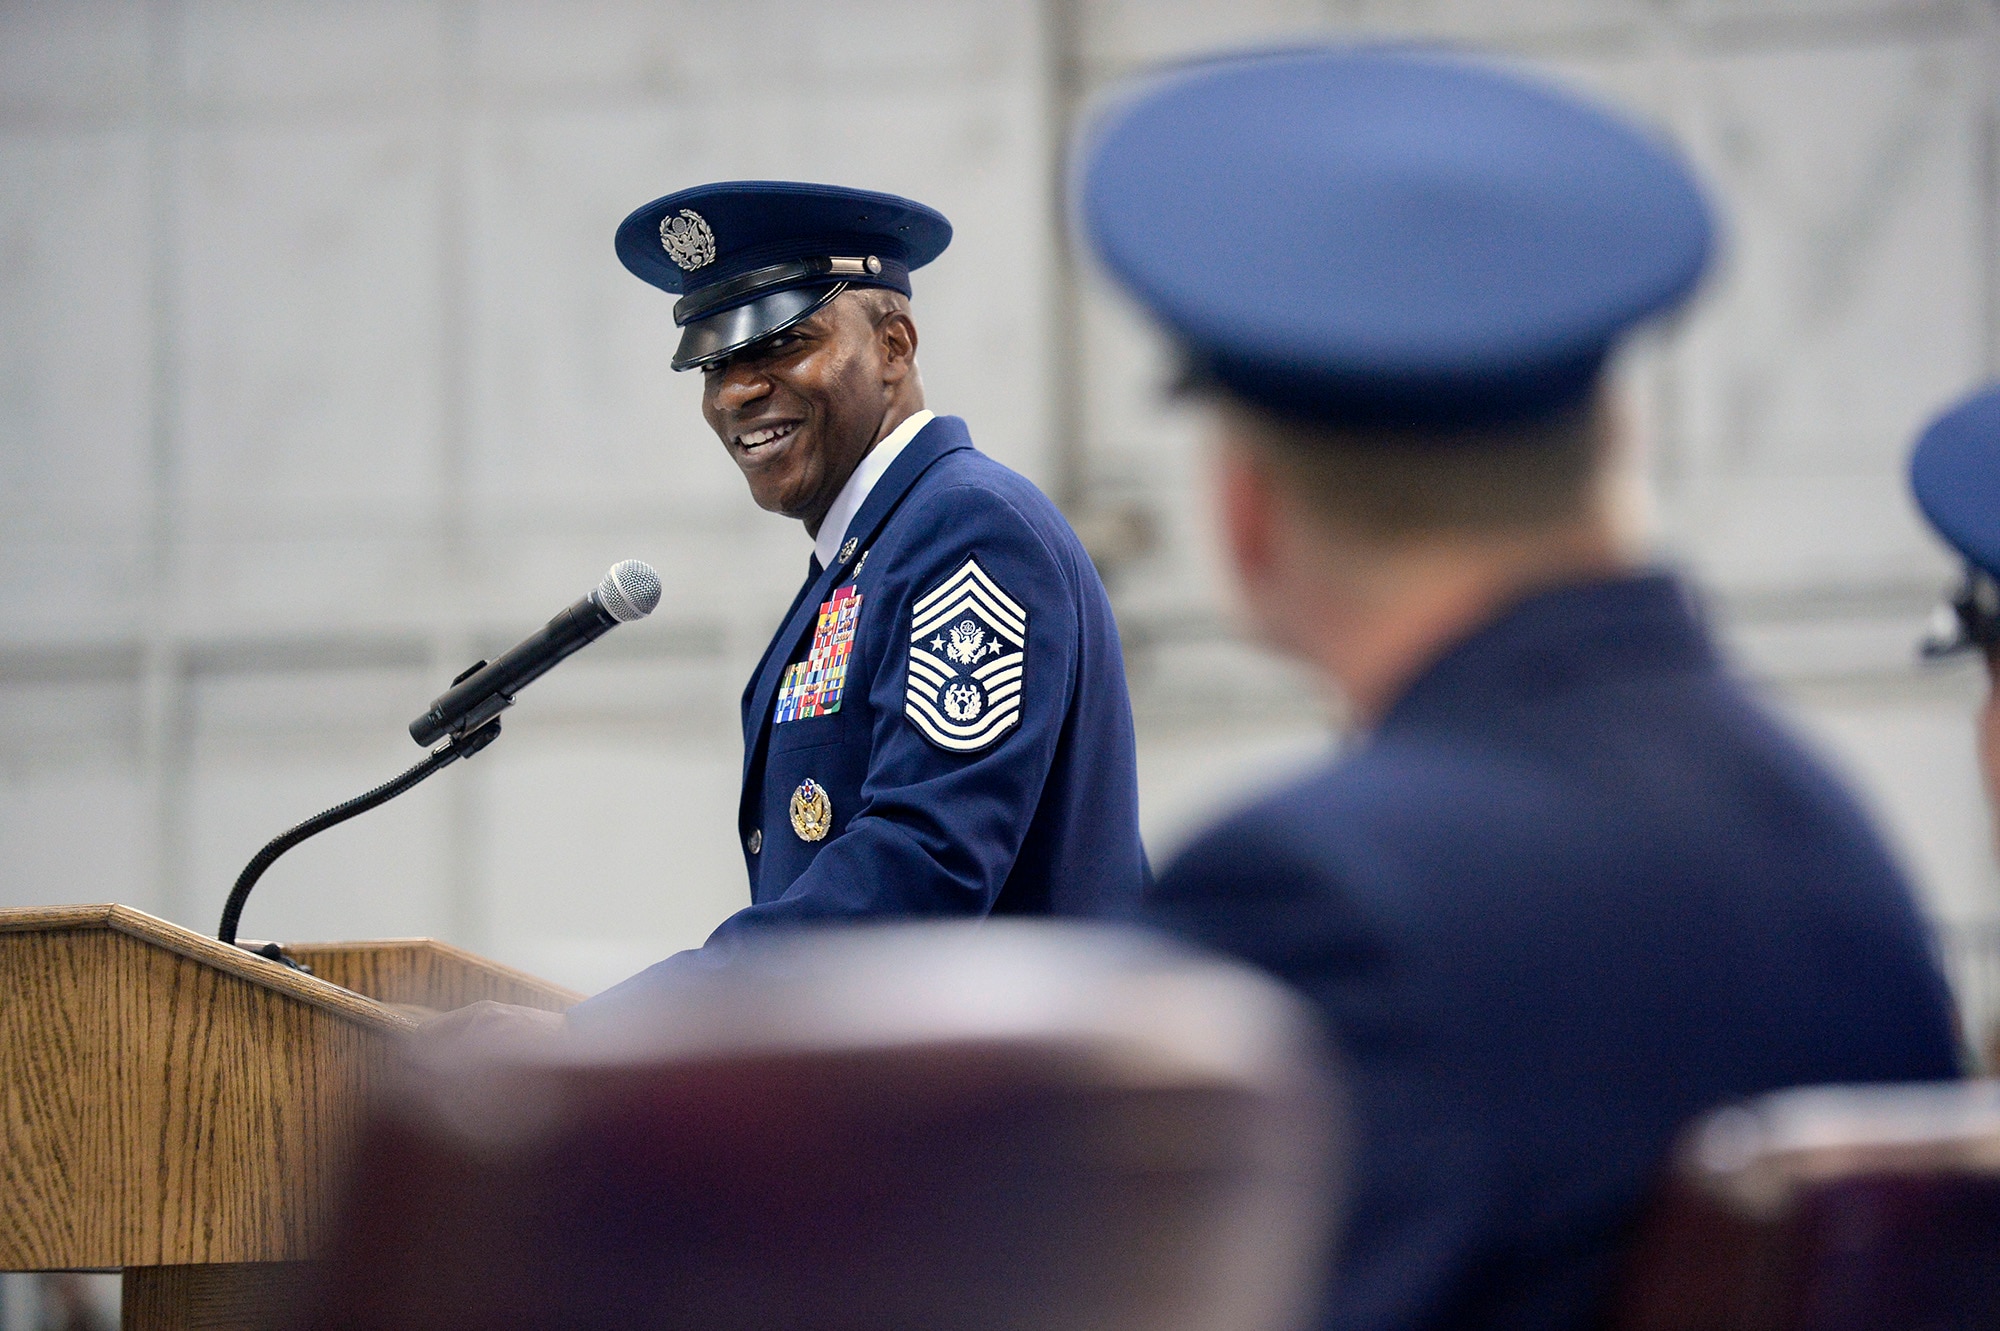 Chief Master Sgt. of the Air Force Kaleth O. Wright thanks Chief Master Sgt. of the Air Force James A. Cody during their retirement and appointment ceremony on Joint Base Andrews, Md., Feb. 17, 2017. Wright succeeds Chief Master Sgt. of the Air Force James A. Cody, who retires after 32 years of service, and he is the 18th Airman to hold this position. (U.S. Air Force photo/Andy Morataya)